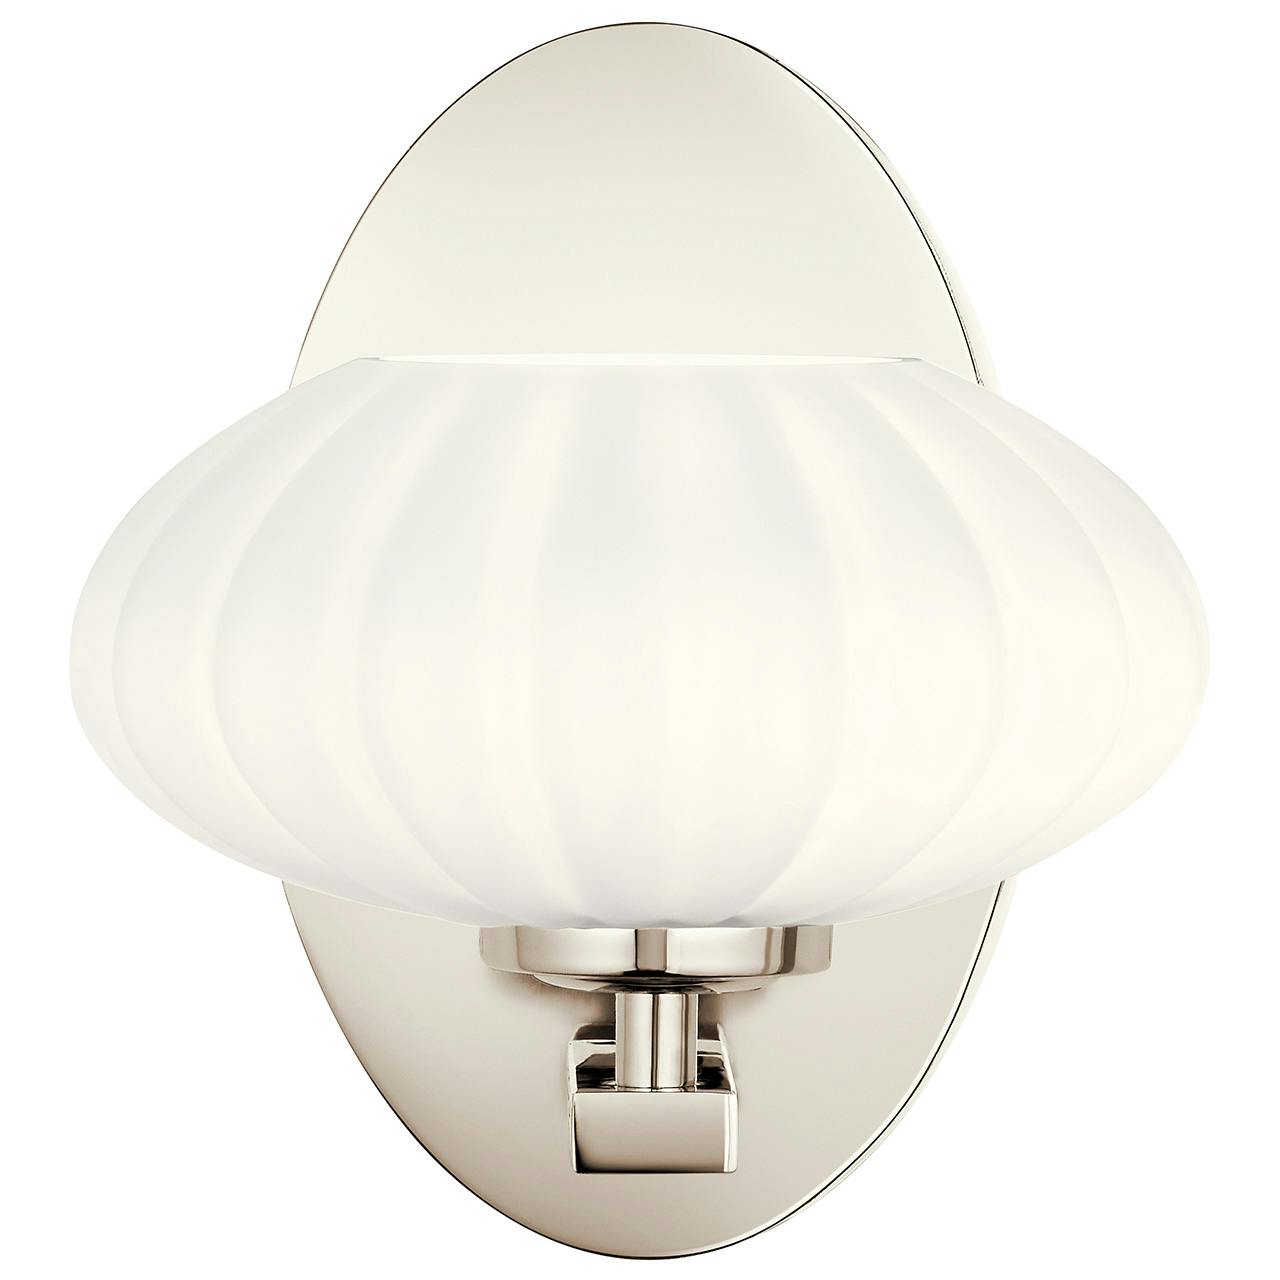 The Pim 8" 1 Light Sconce in Polished Nickel facing up on a white background